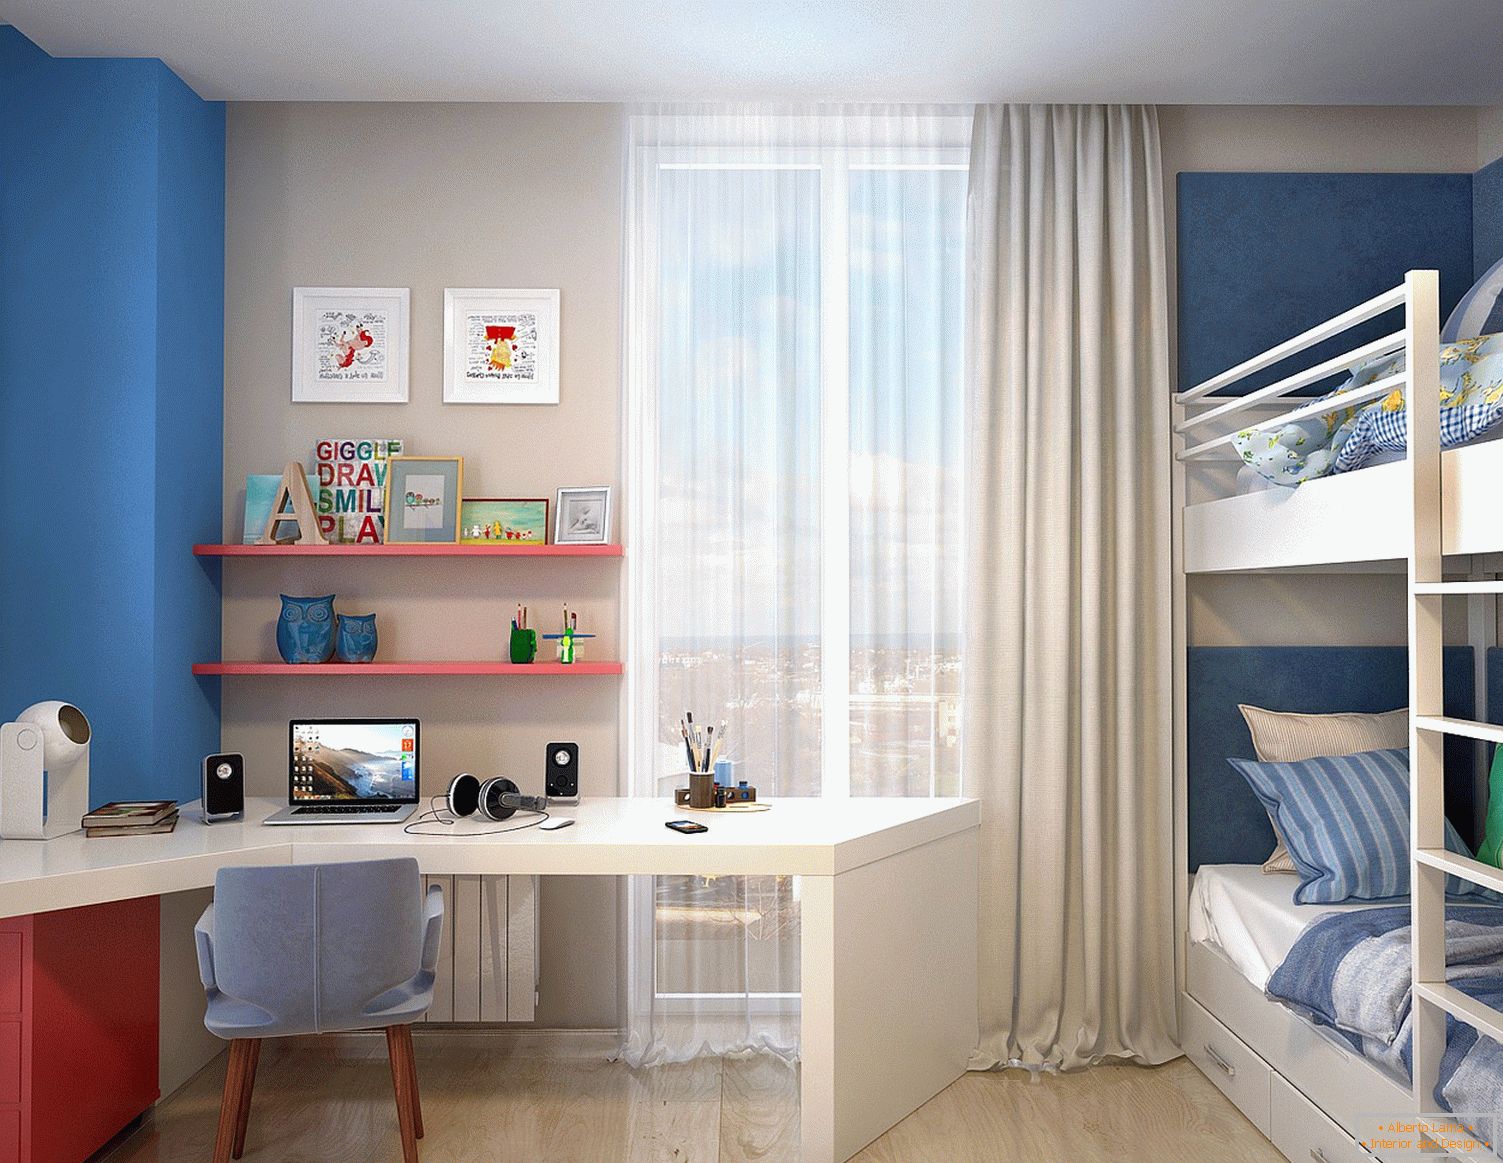 A small children's room with a bunk bed for two children